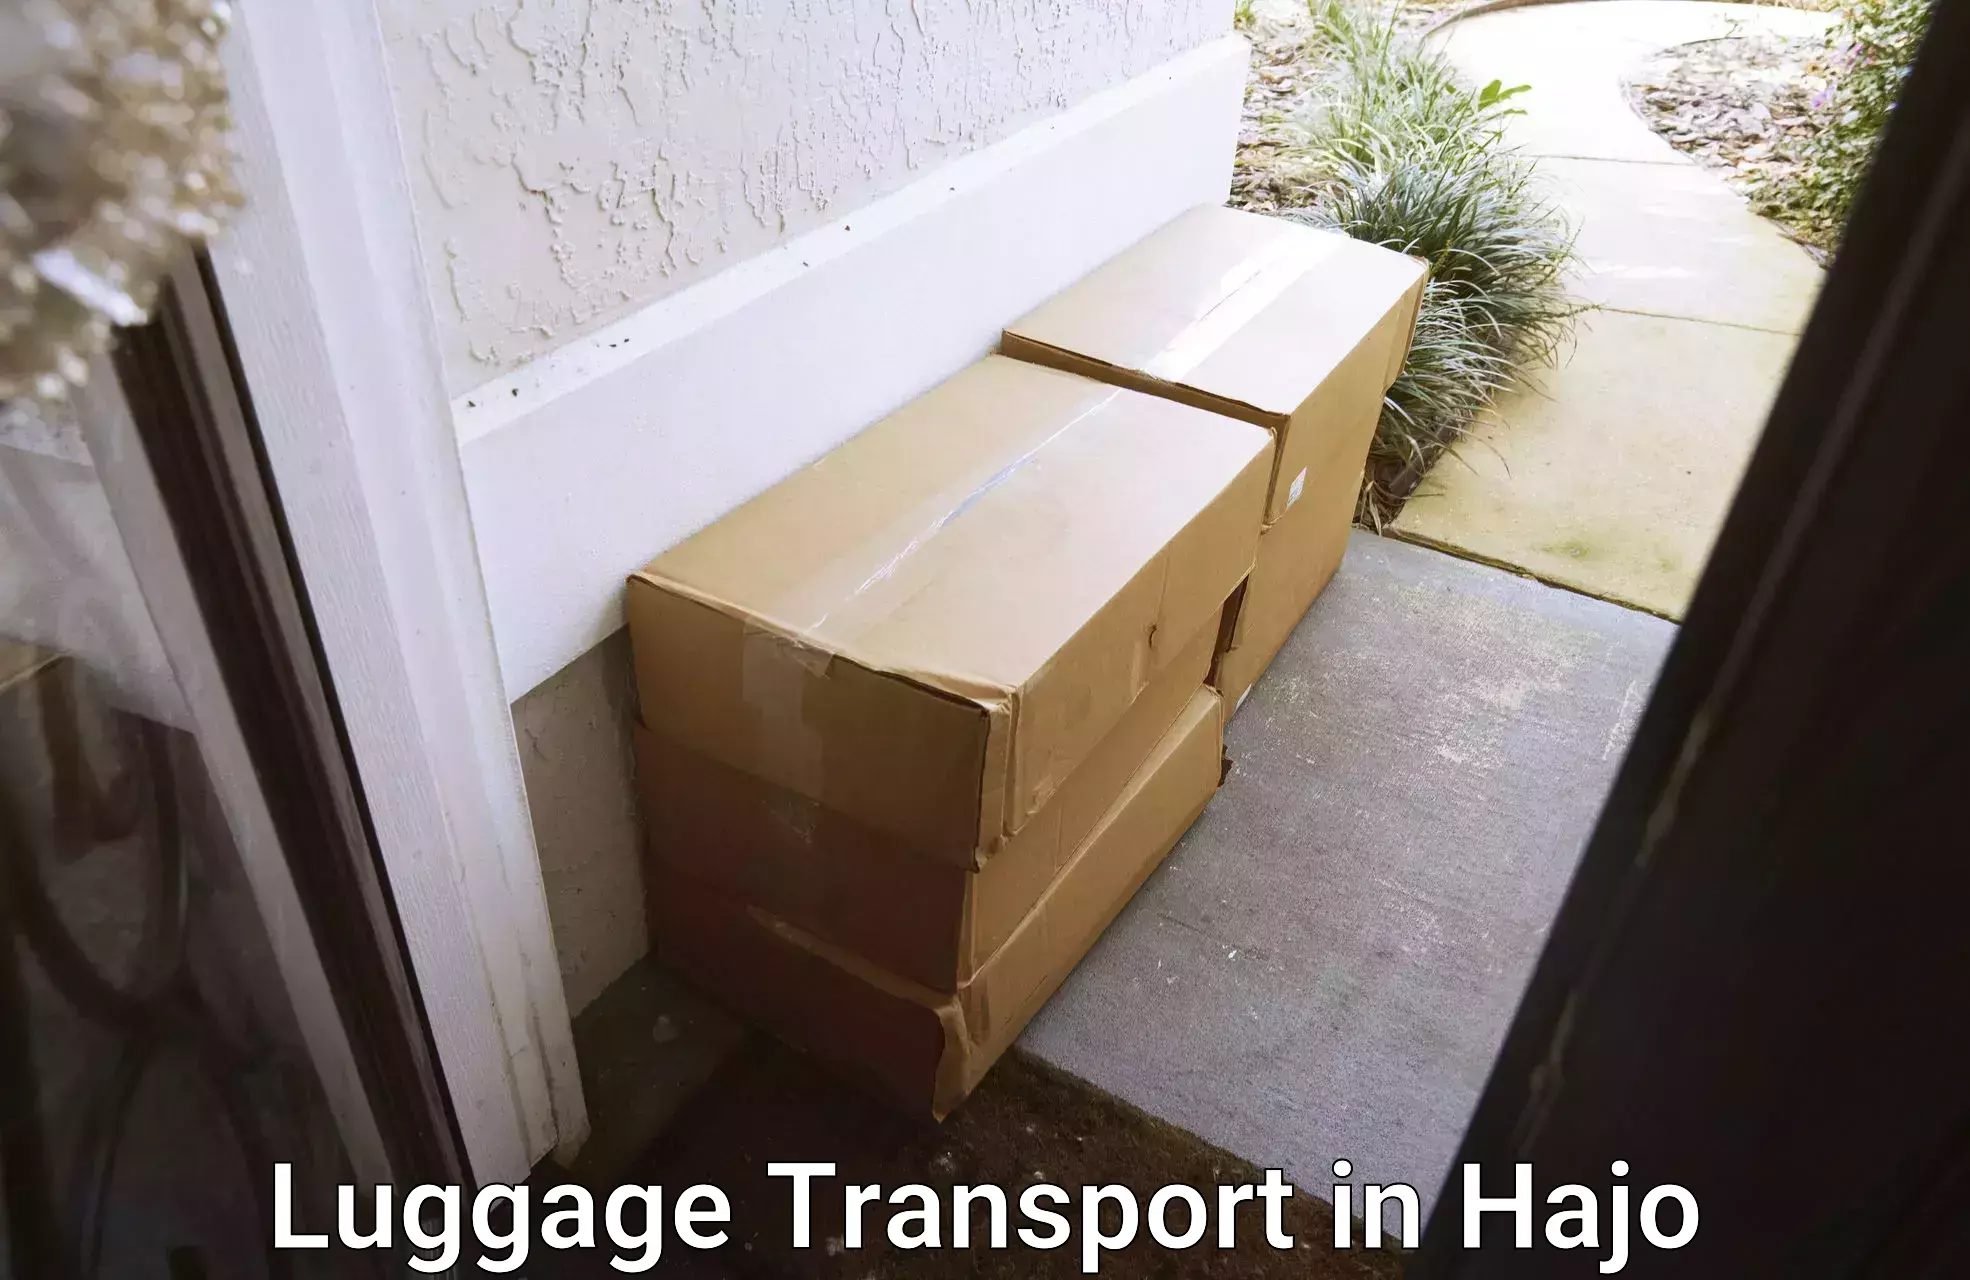 Doorstep luggage collection in Hajo